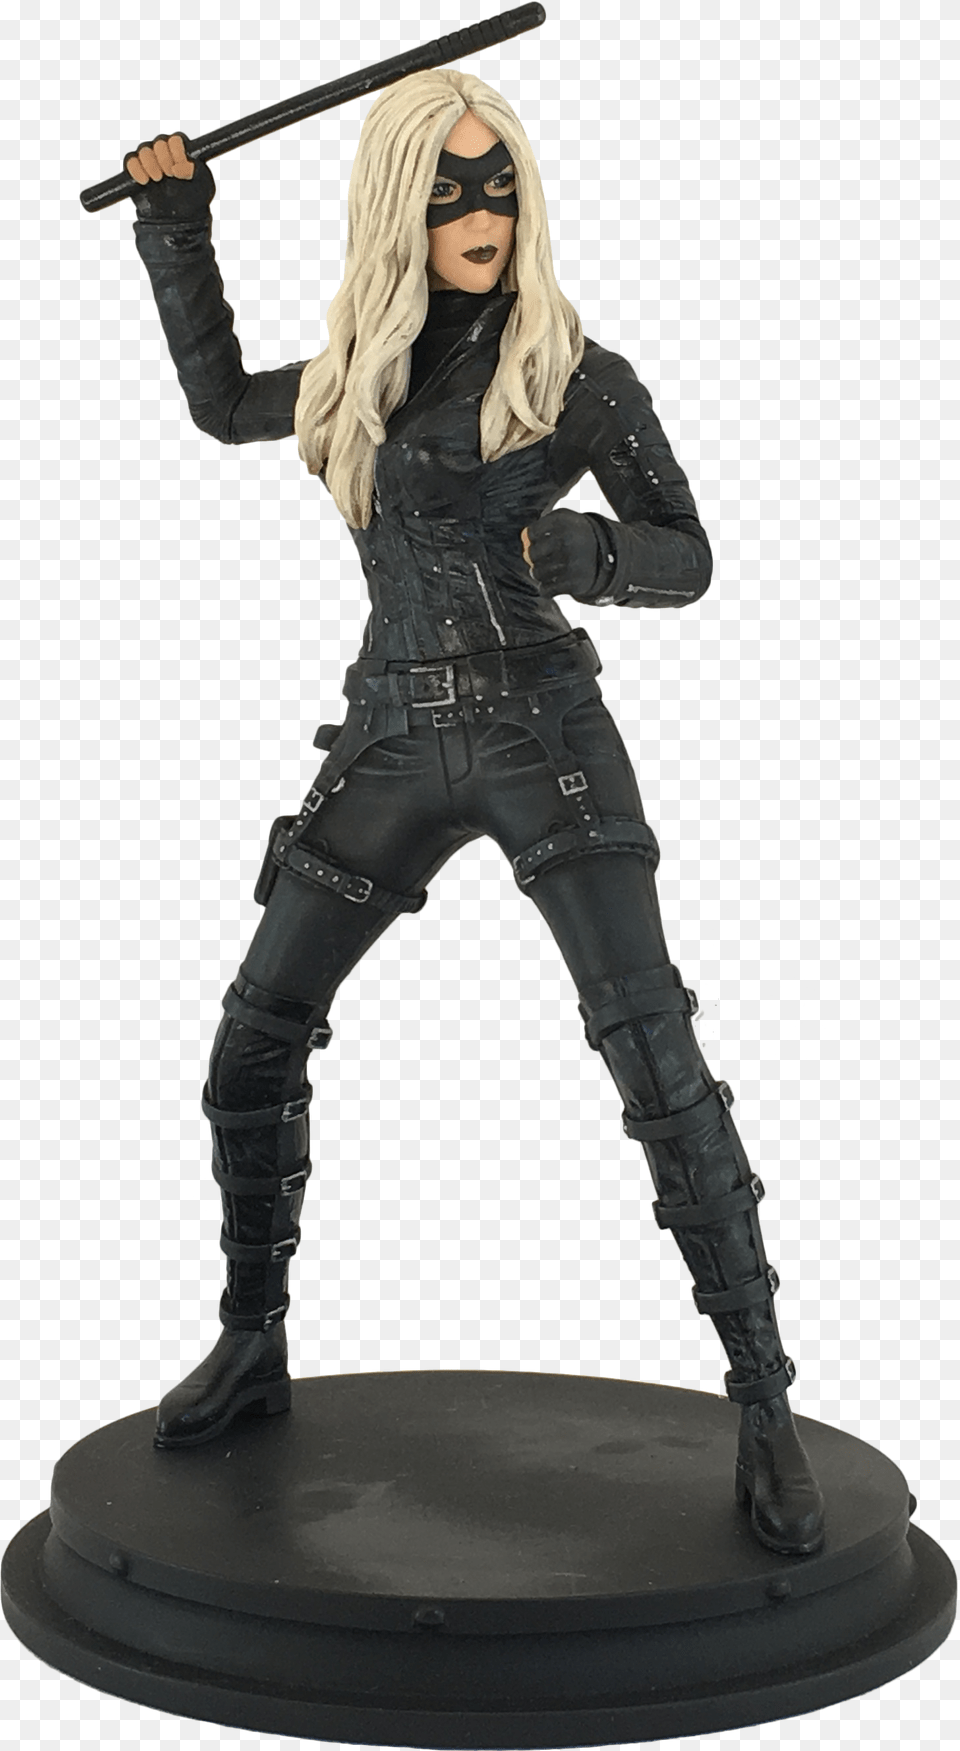 Icon Heroes San Diego Comic Dc Comics Tv Arrow Black Canary Statue, Clothing, Costume, Figurine, Person Png Image